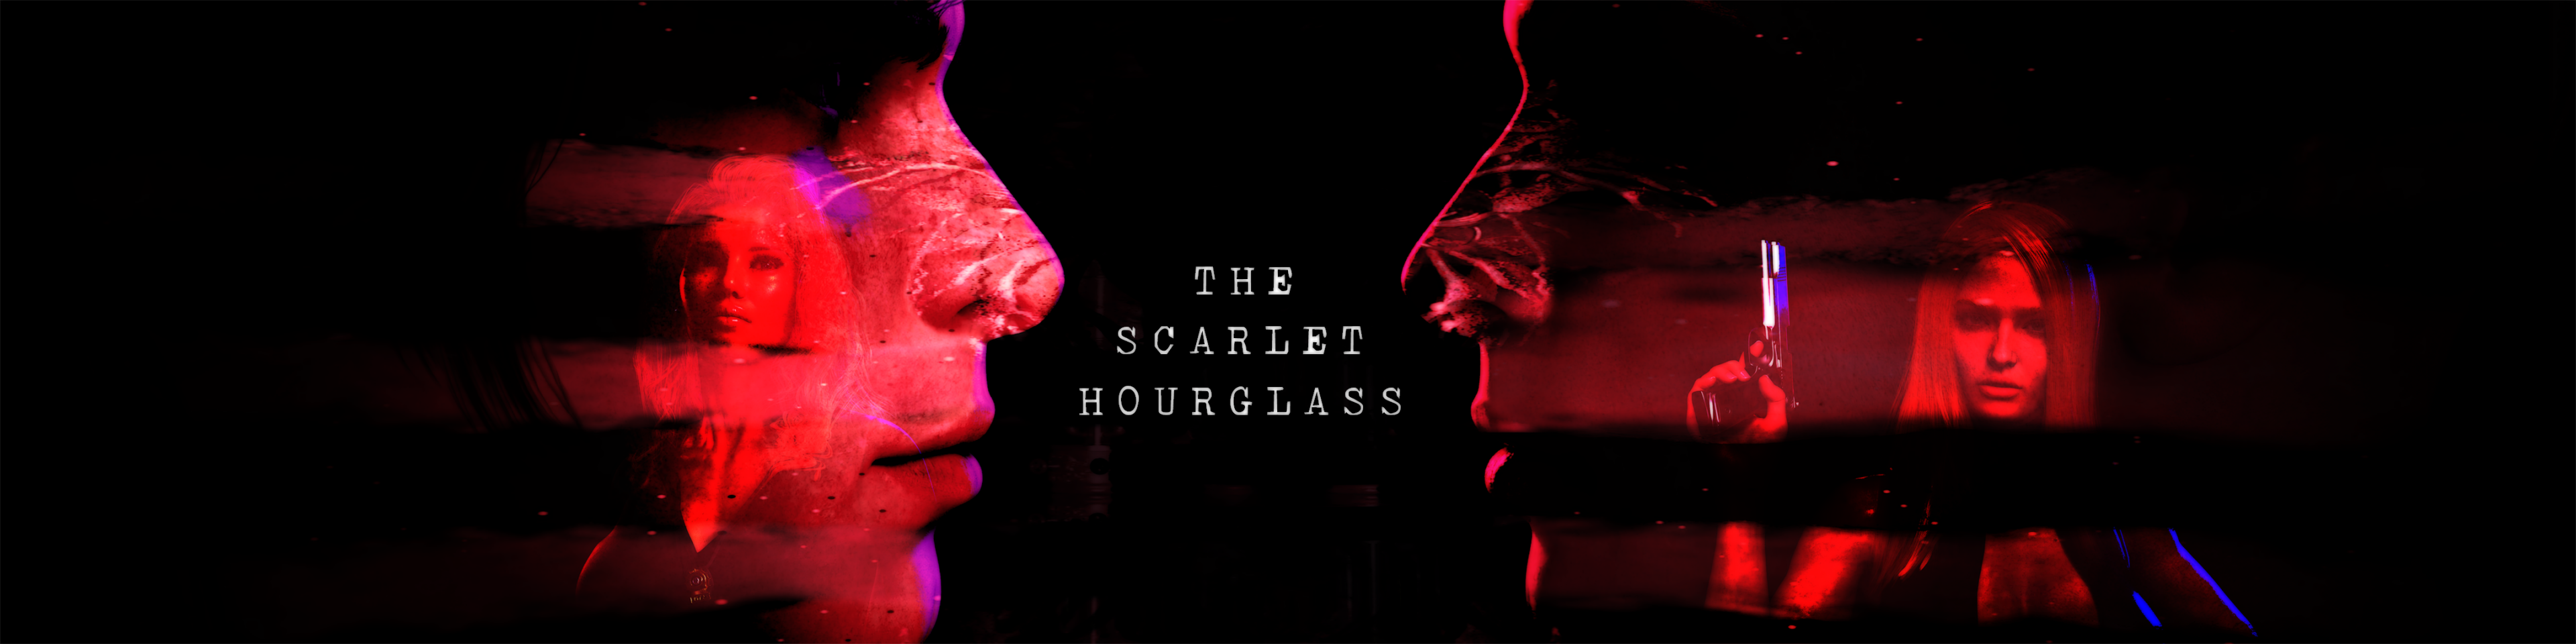 The Scarlet Hourglass poster